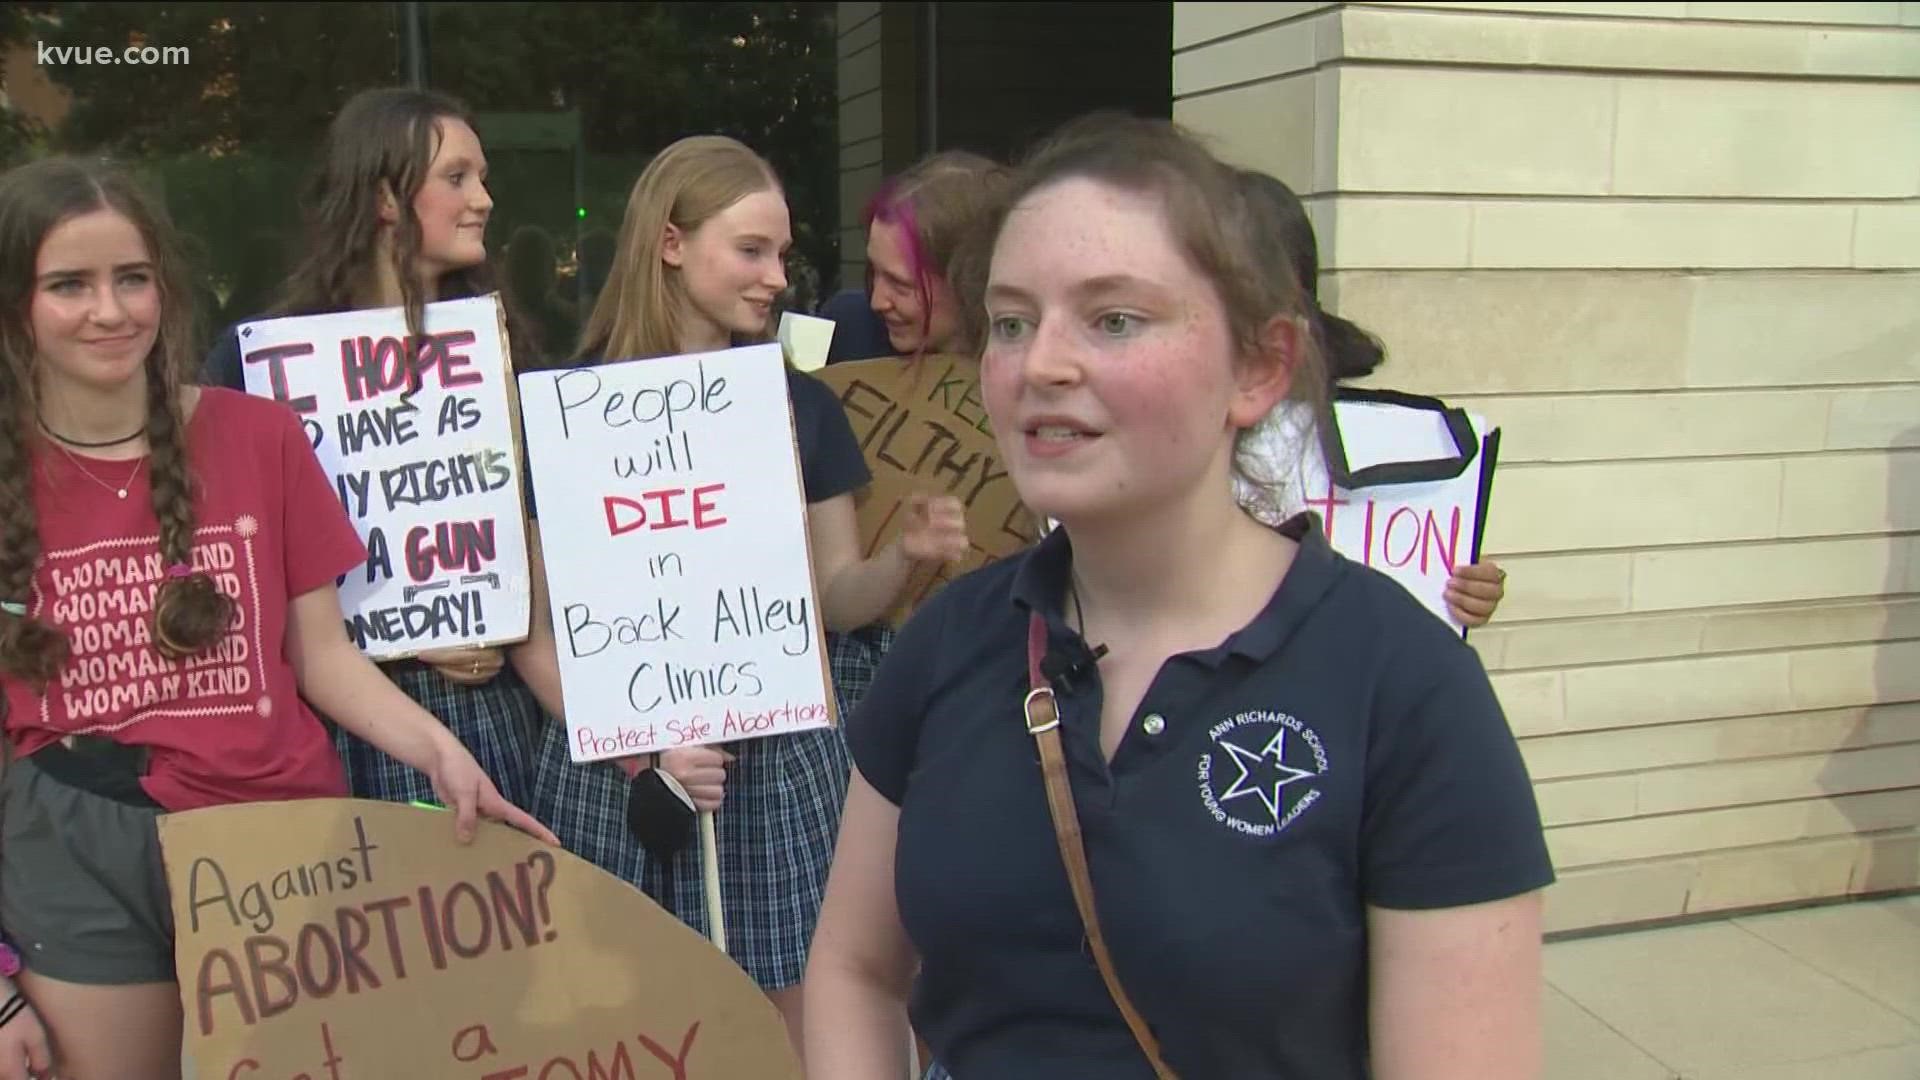 Abortion rights supporters rallied in Austin on Tuesday following the leaked draft decision to overturn Roe v. Wade.